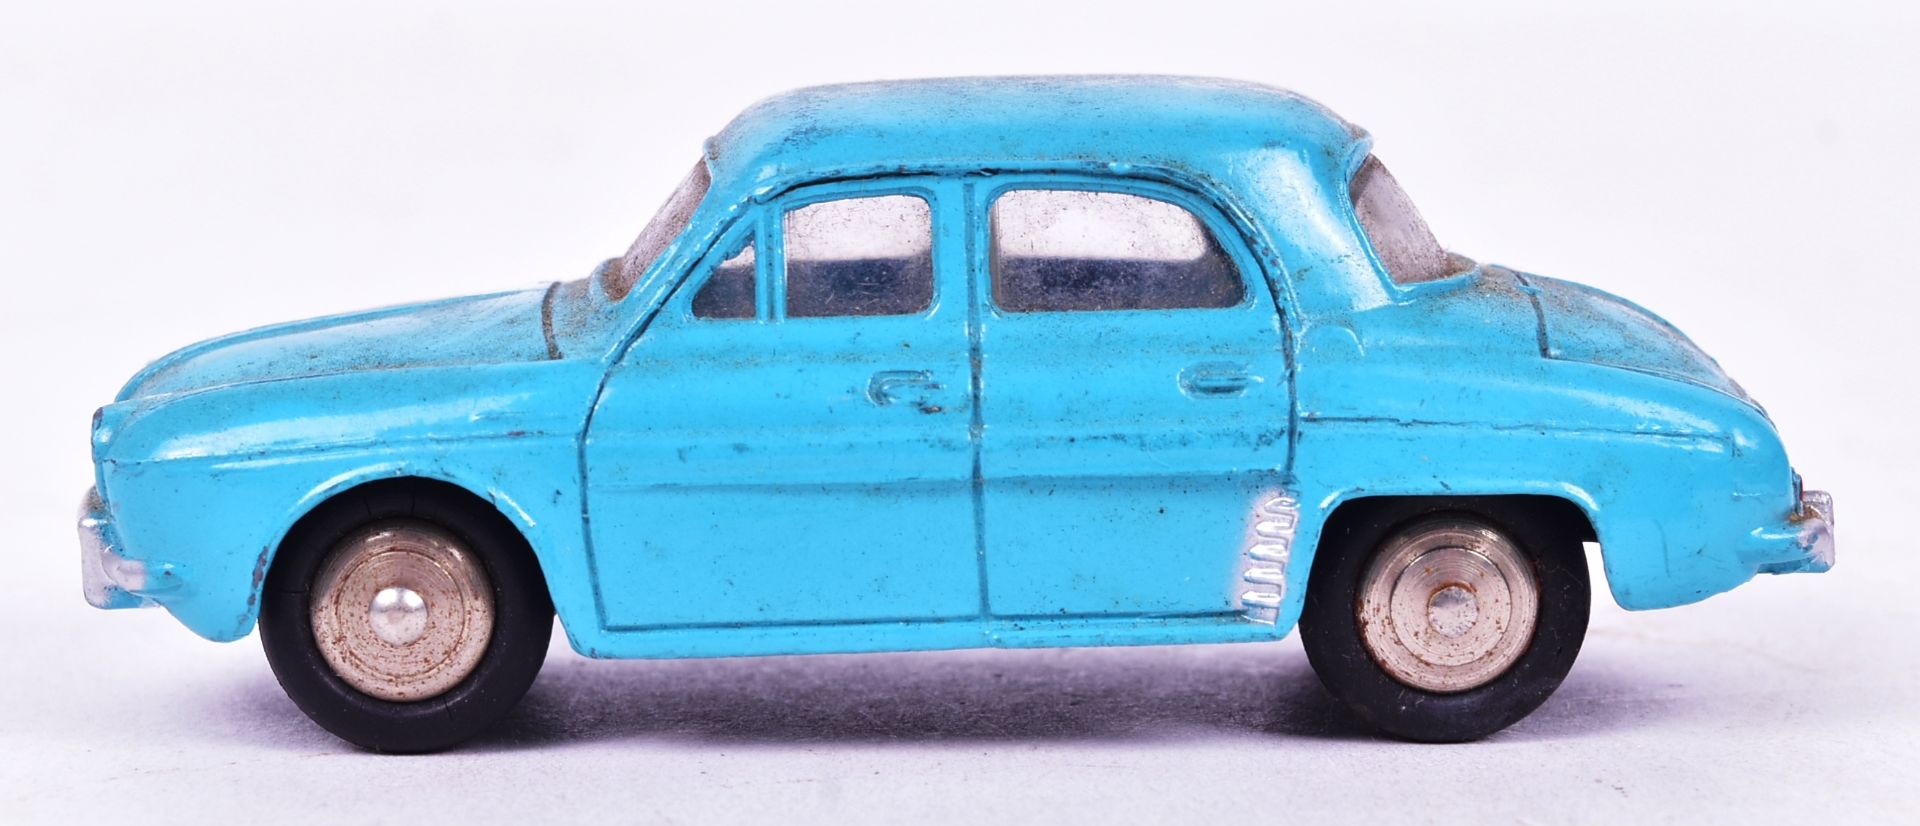 DIECAST - FRENCH DINKY TOYS - RENAULT DAUPHINE - Image 2 of 5